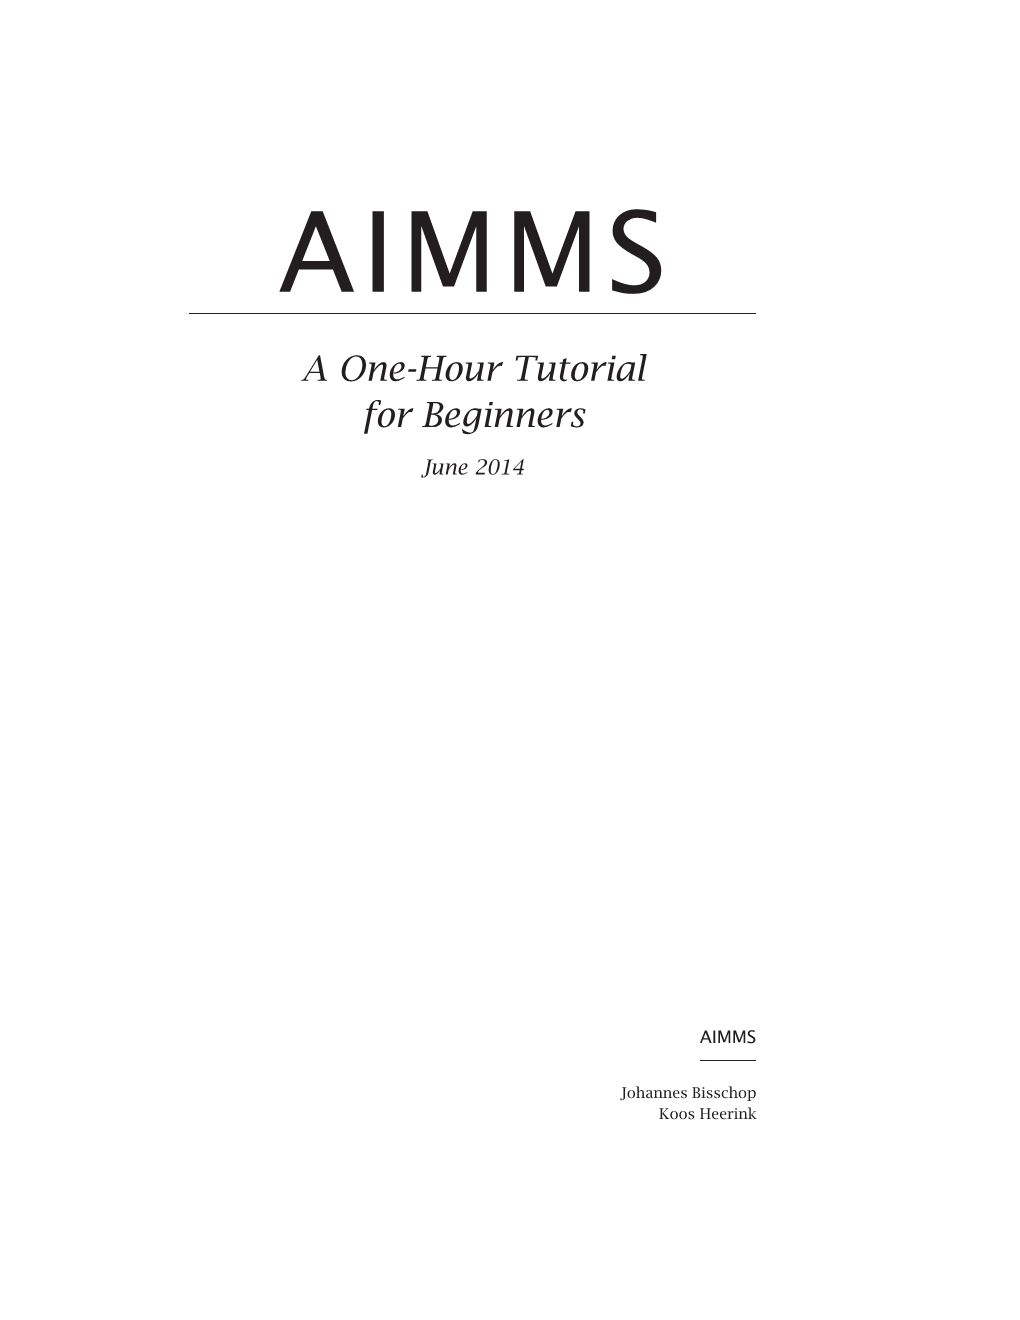 AIMMS Tutorial for Beginners